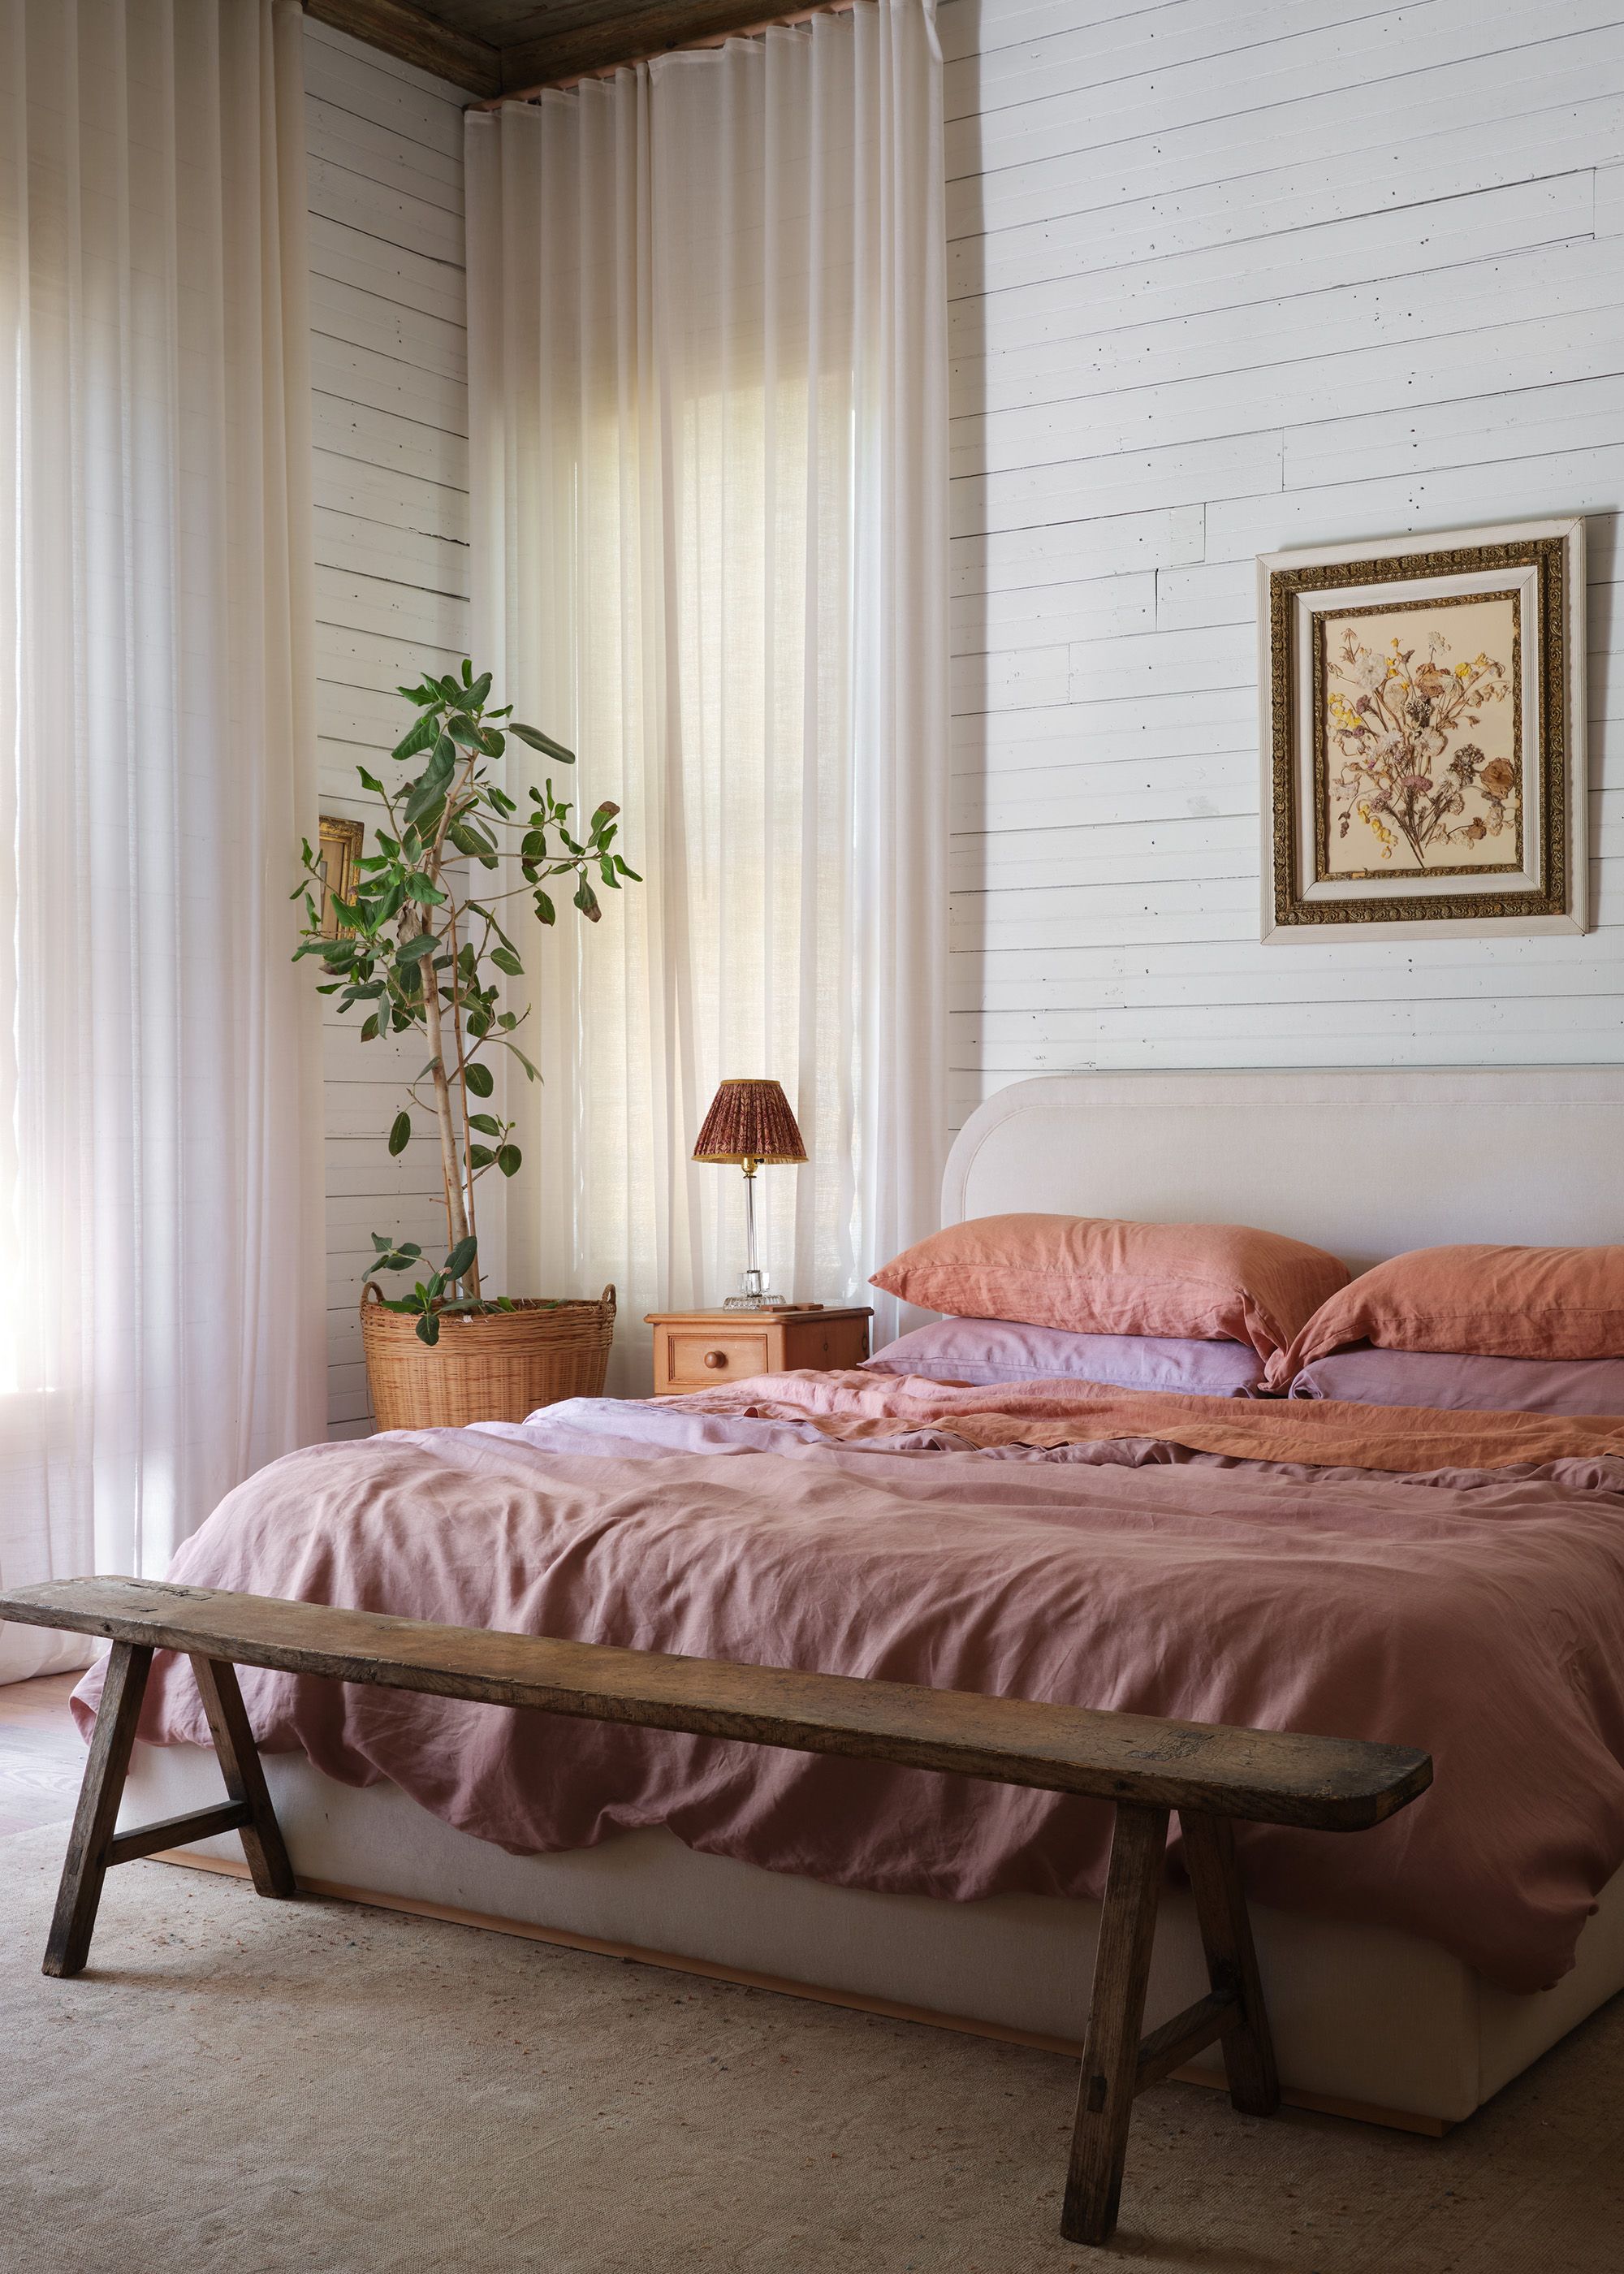 How to Turn Linen Flat Sheets Into Affordable Curtains